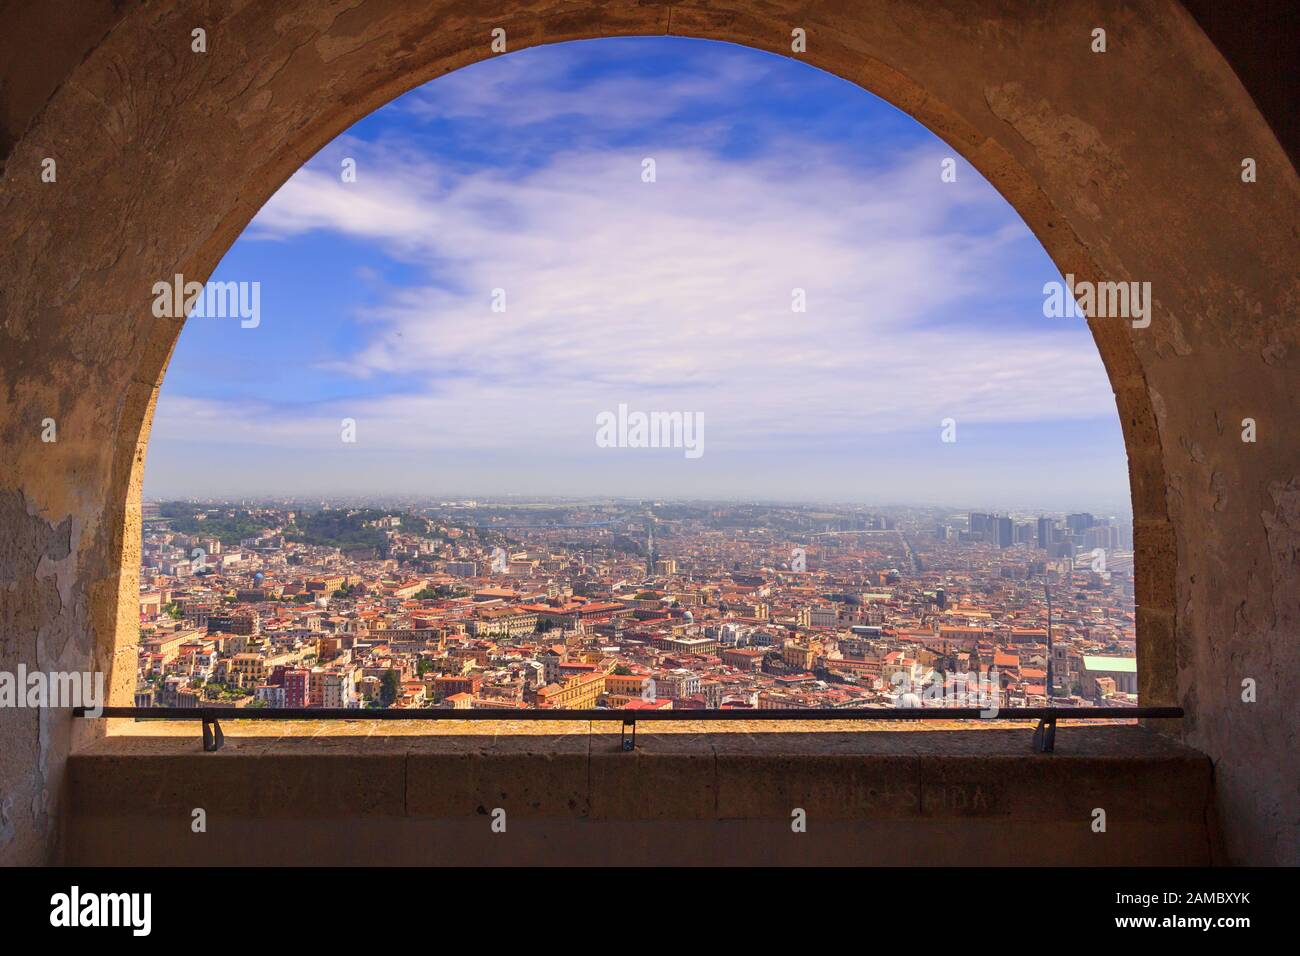 Panoramic view of the city of Naples through the arch of the medieval fortress Castel Sant'Elmo. Skyline with historical Old town, Spaccanapoli street. Stock Photo